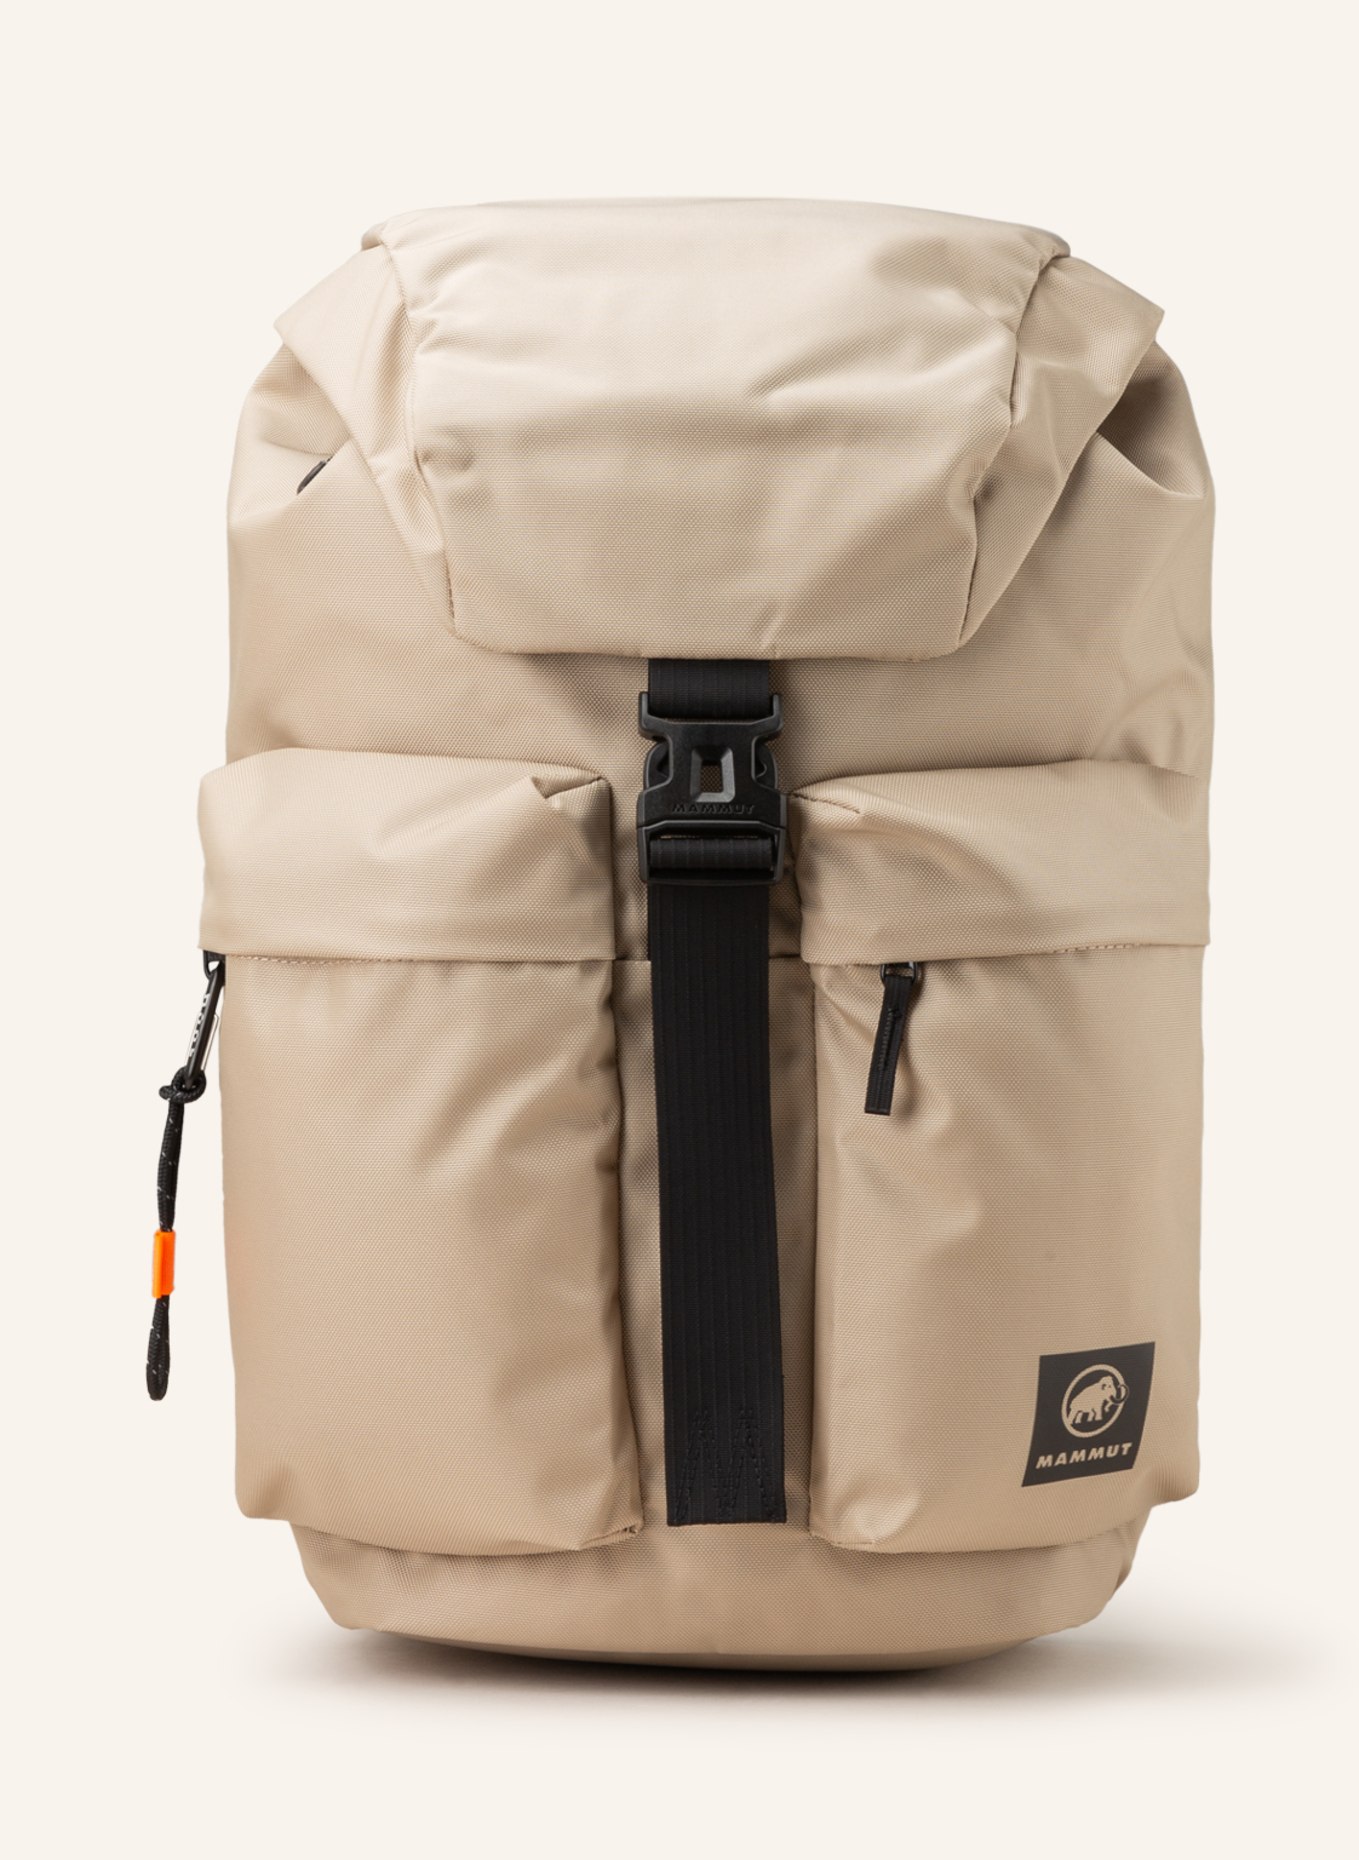 MAMMUT Backpack XERON 30 with laptop compartment in light brown